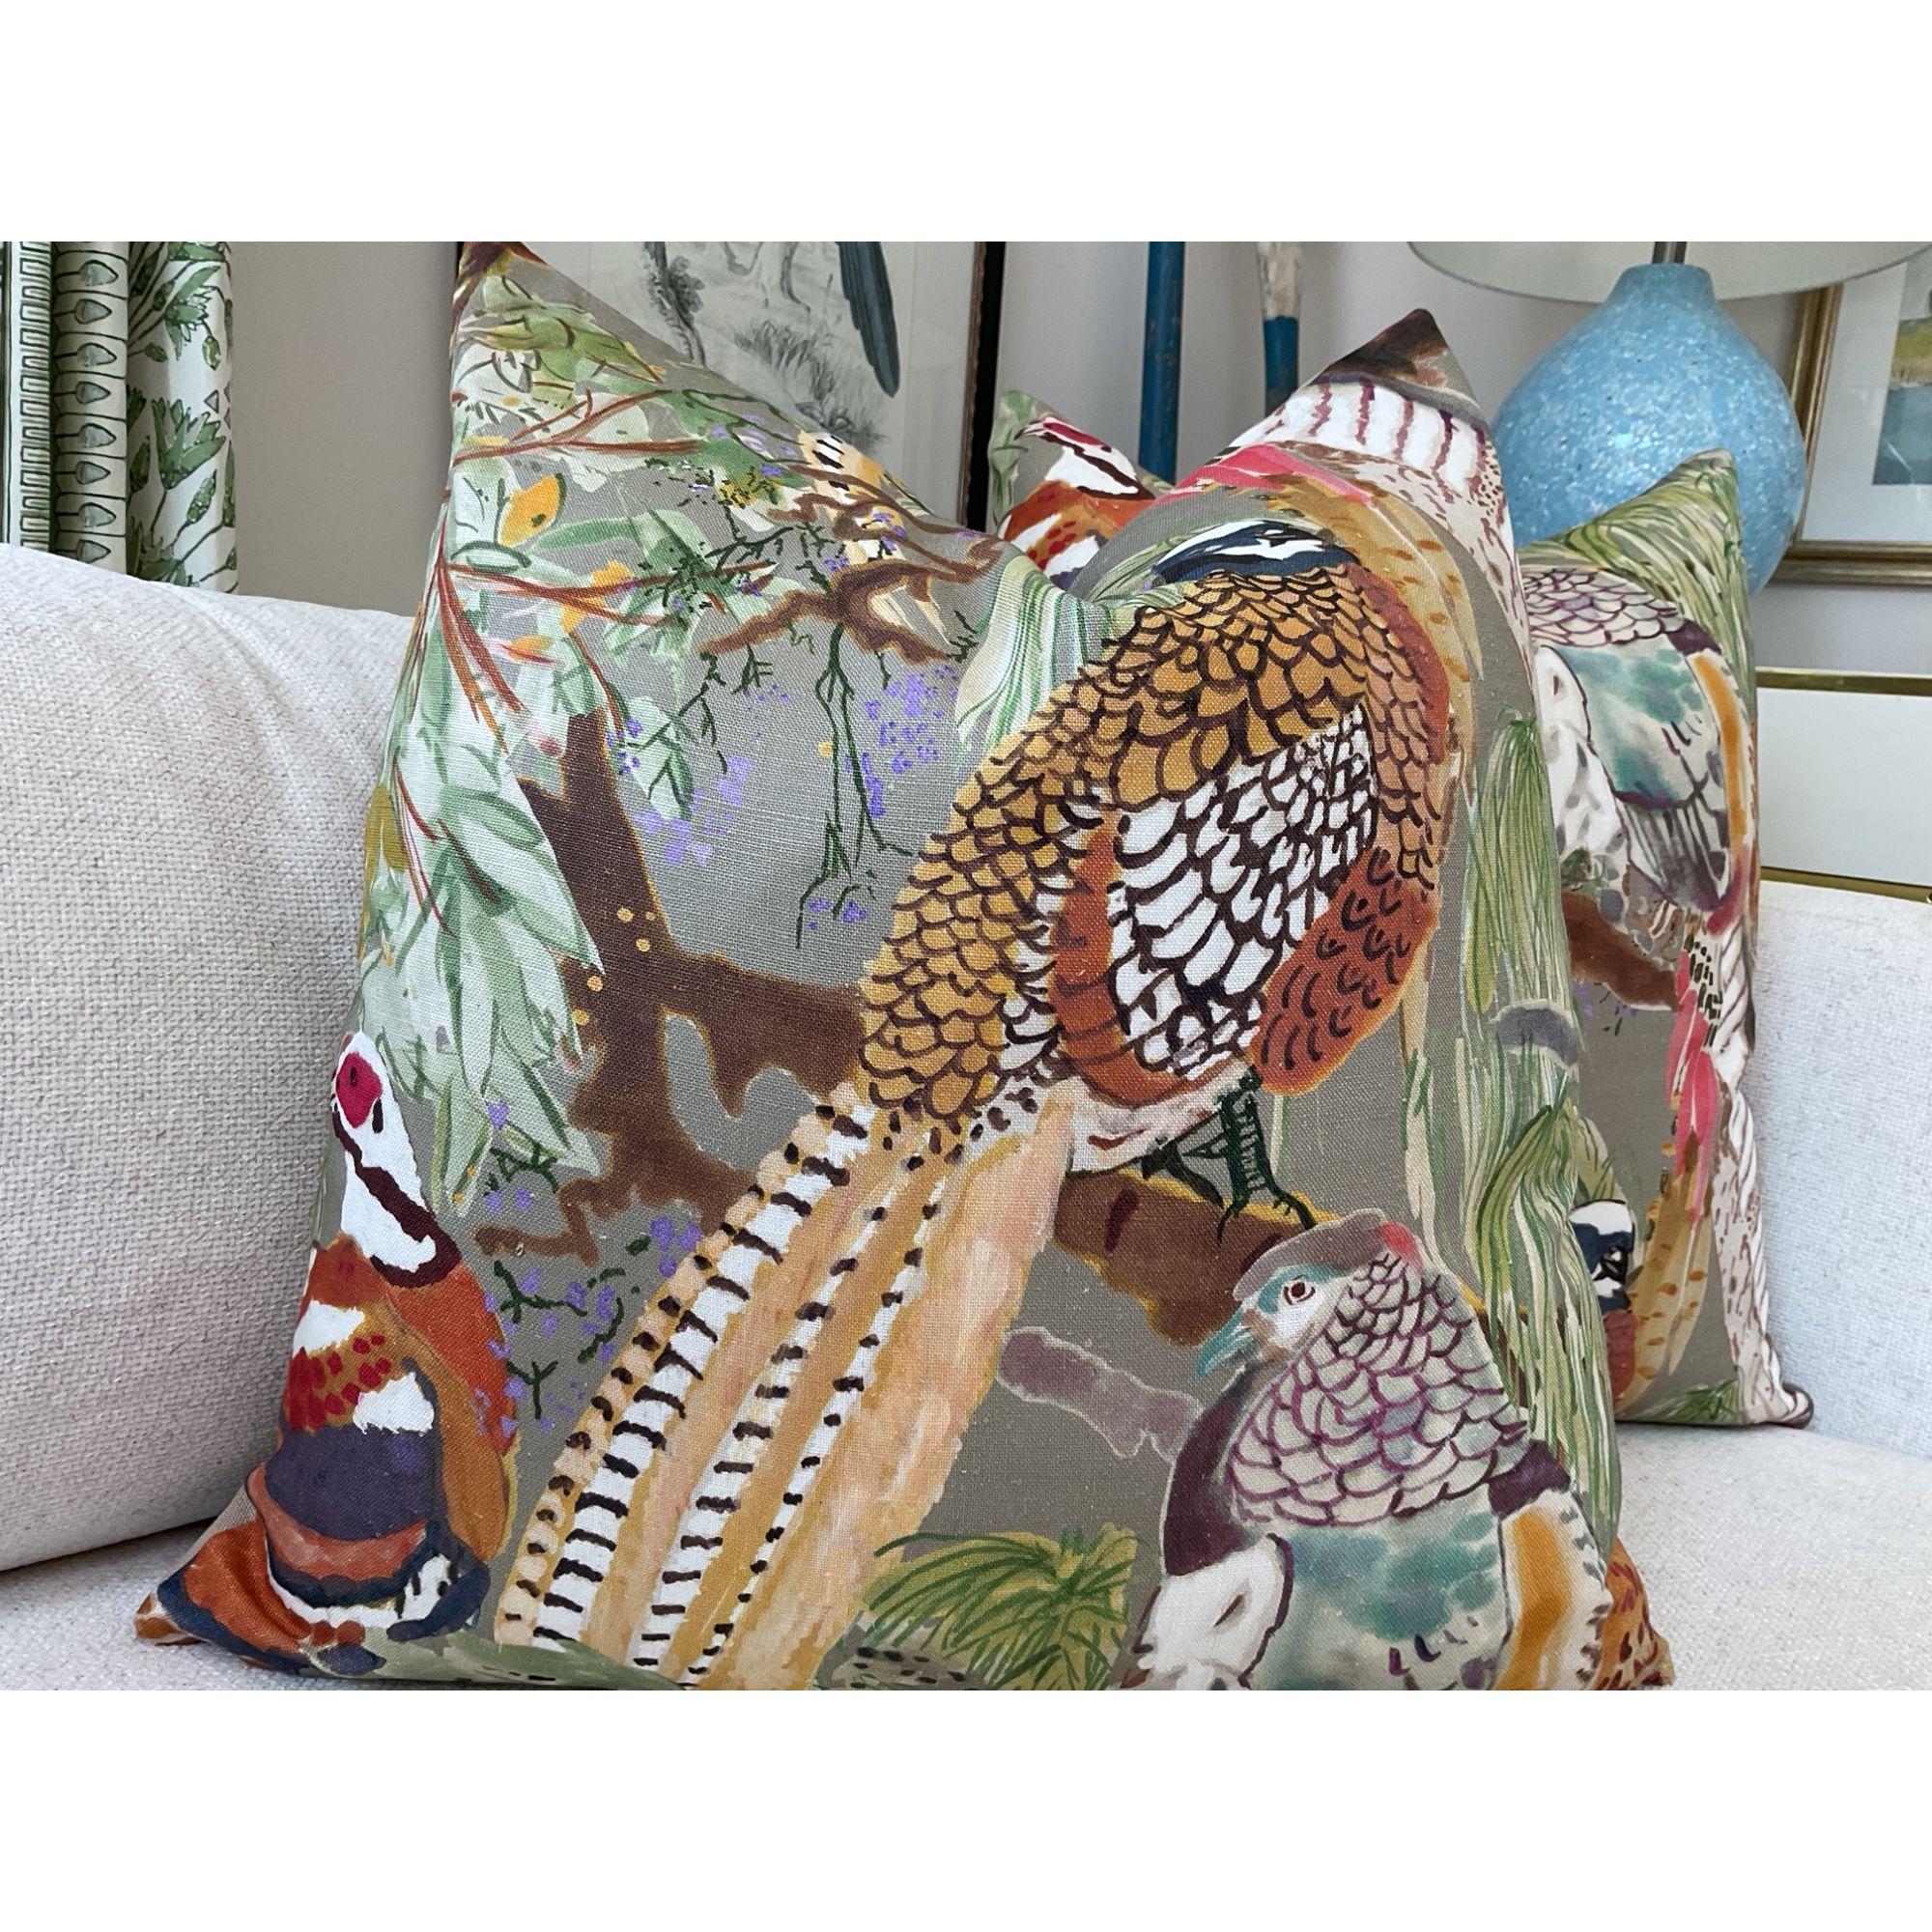 GORGEOUS!

Lovely linen rich and luxurious fabric from Lee Jofa. Game Birds features….well…..game birds. (I think they’re quail?) in wonderfully saturated shades of cinnamon brown and black with foliage in deep green and straw tan. How perfect would